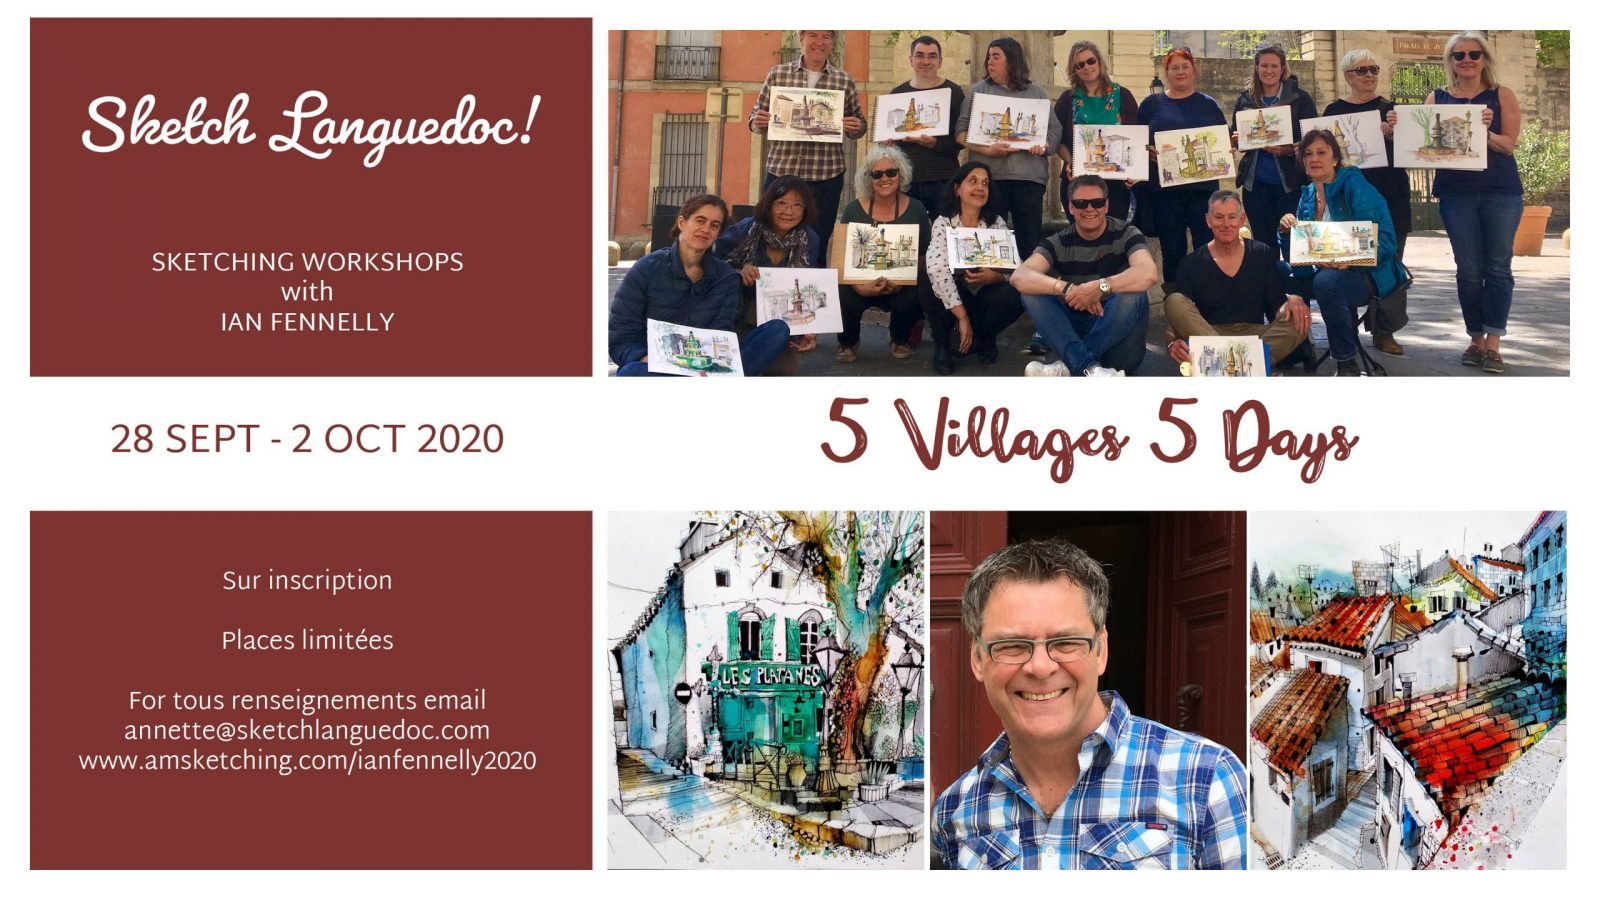  | Workshops in Bize-Minervois and the surrounding area with International Urban Sketchers Instructor and British Artist Ian Fennelly 28 September - 2 October 2020